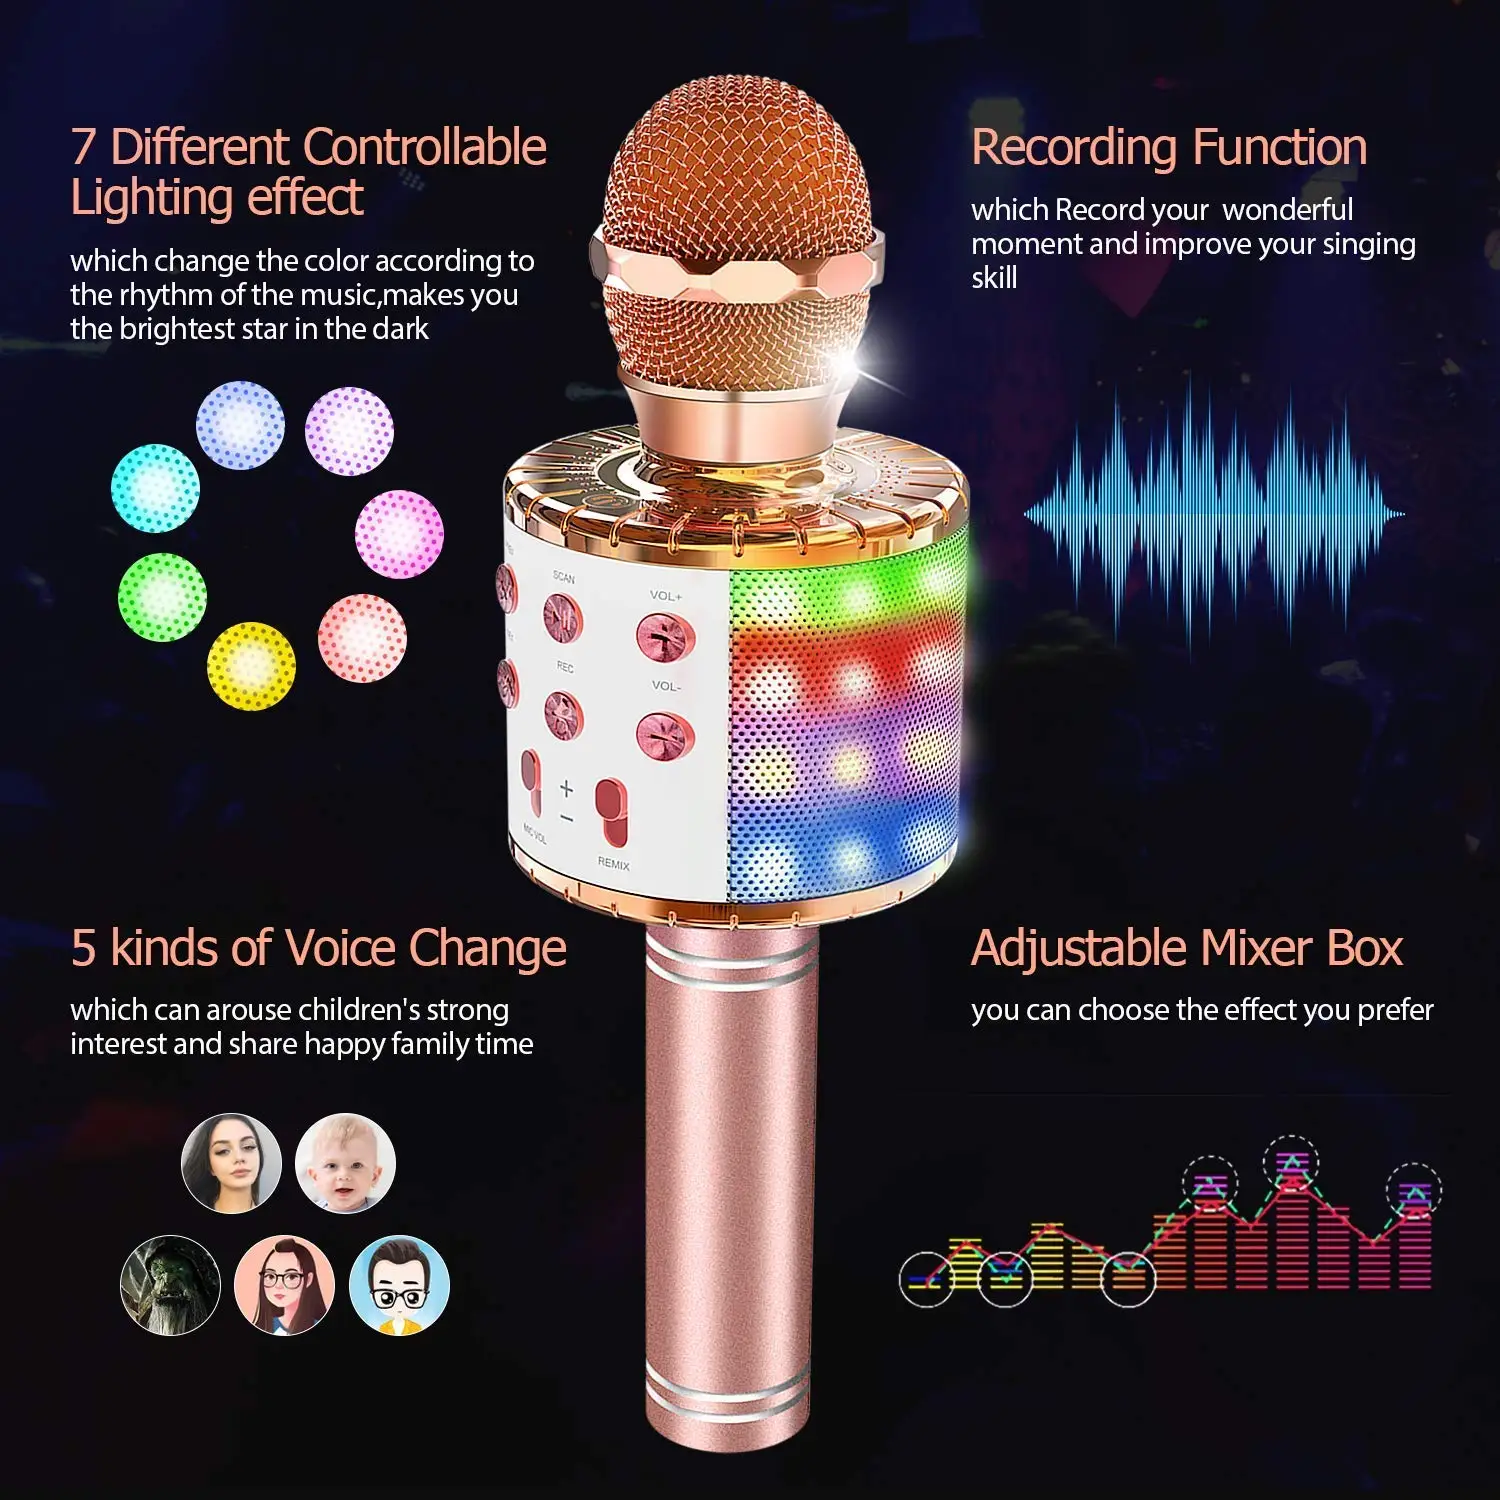 Wireless Karaoke Microphone, 4 in 1 Bluetooth Microphone for Kids With Led Lights Speaker Record Remix Function